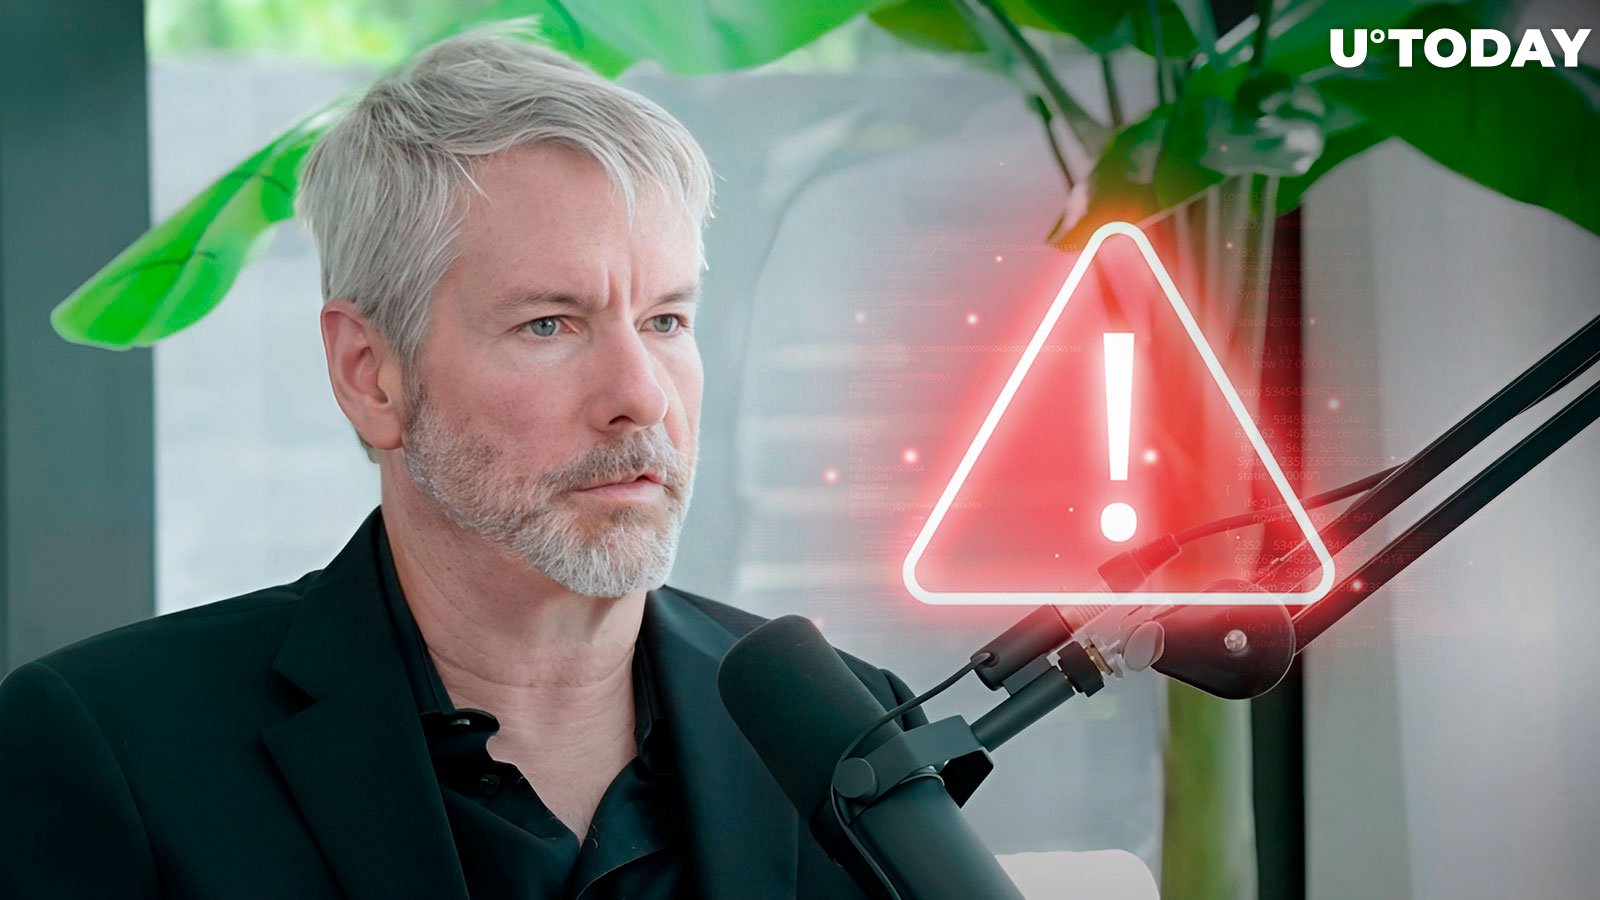 Crypto Scam Alert: AI-Powered Deepfake of Michael Saylor Appears on YouTube